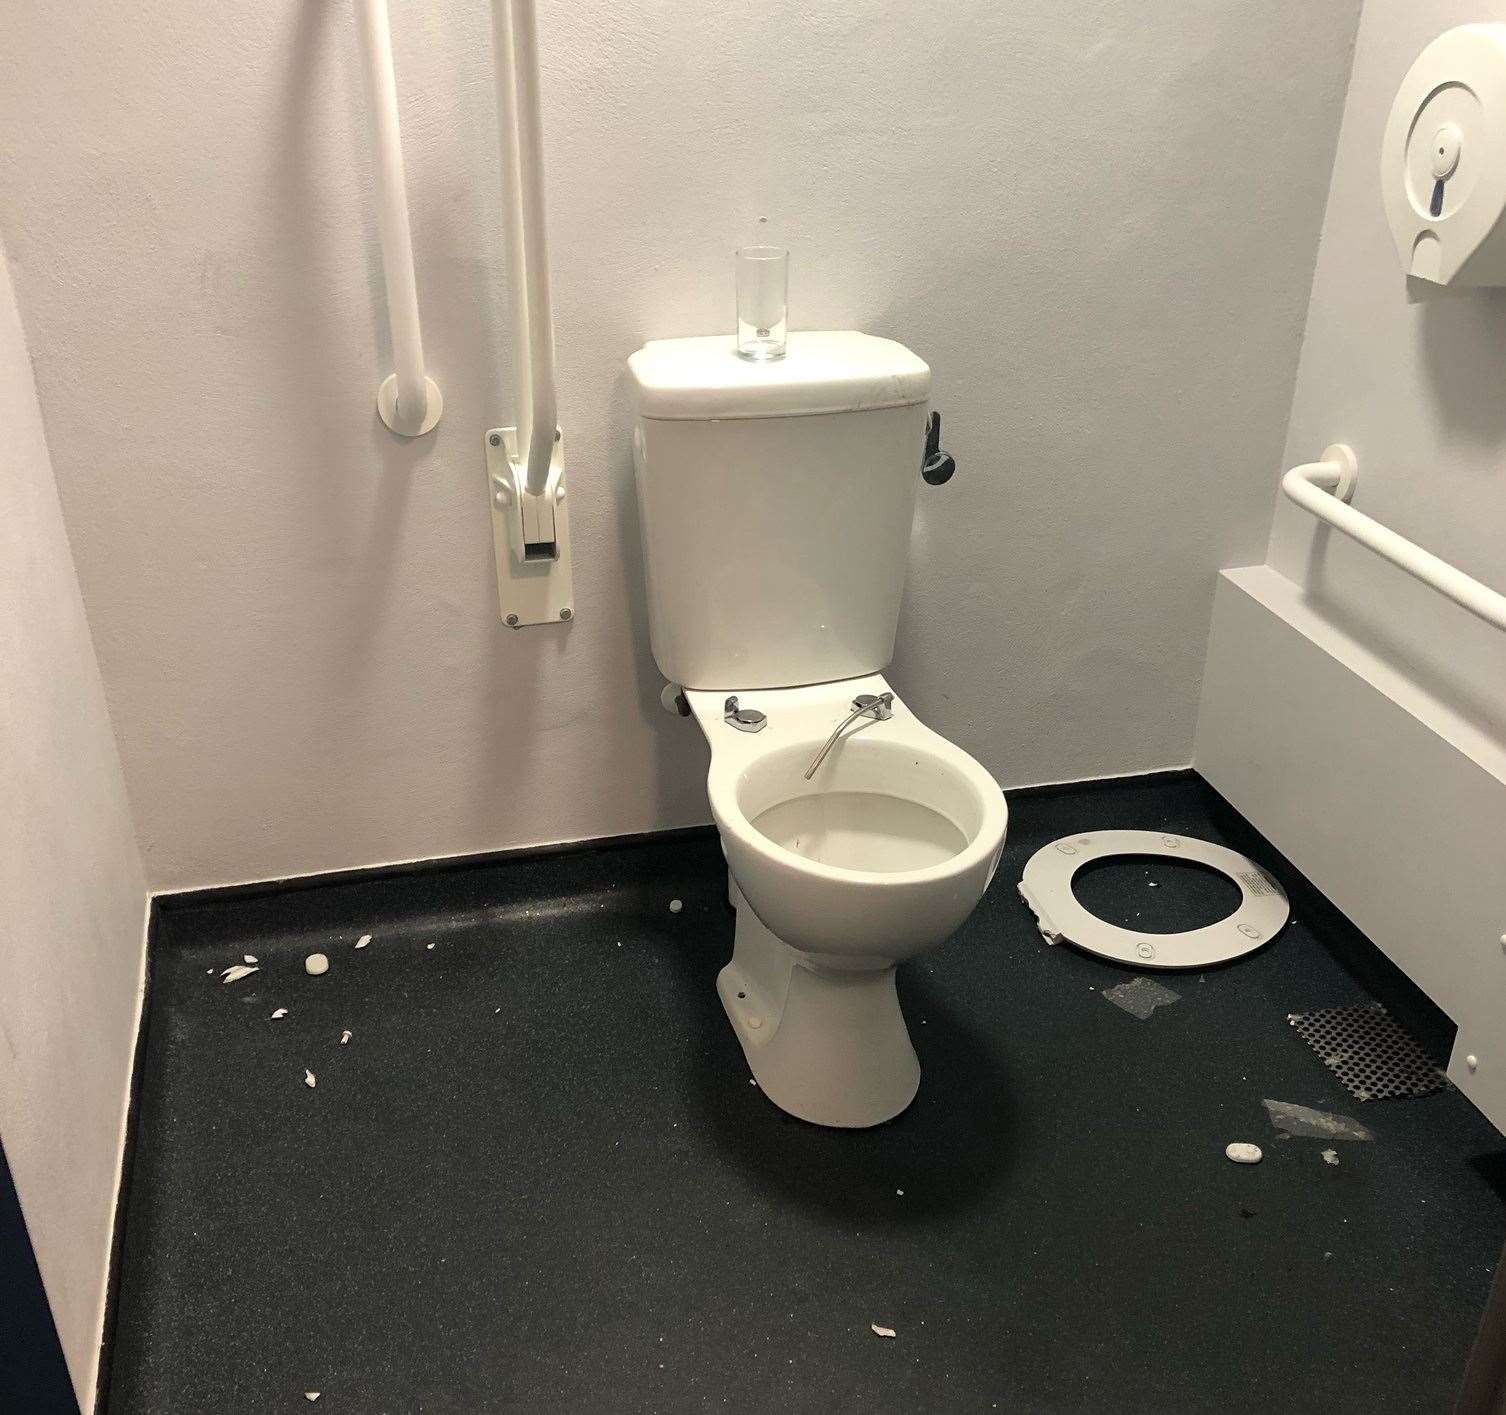 Damage done to the toilet in the male facility will not be repaired.